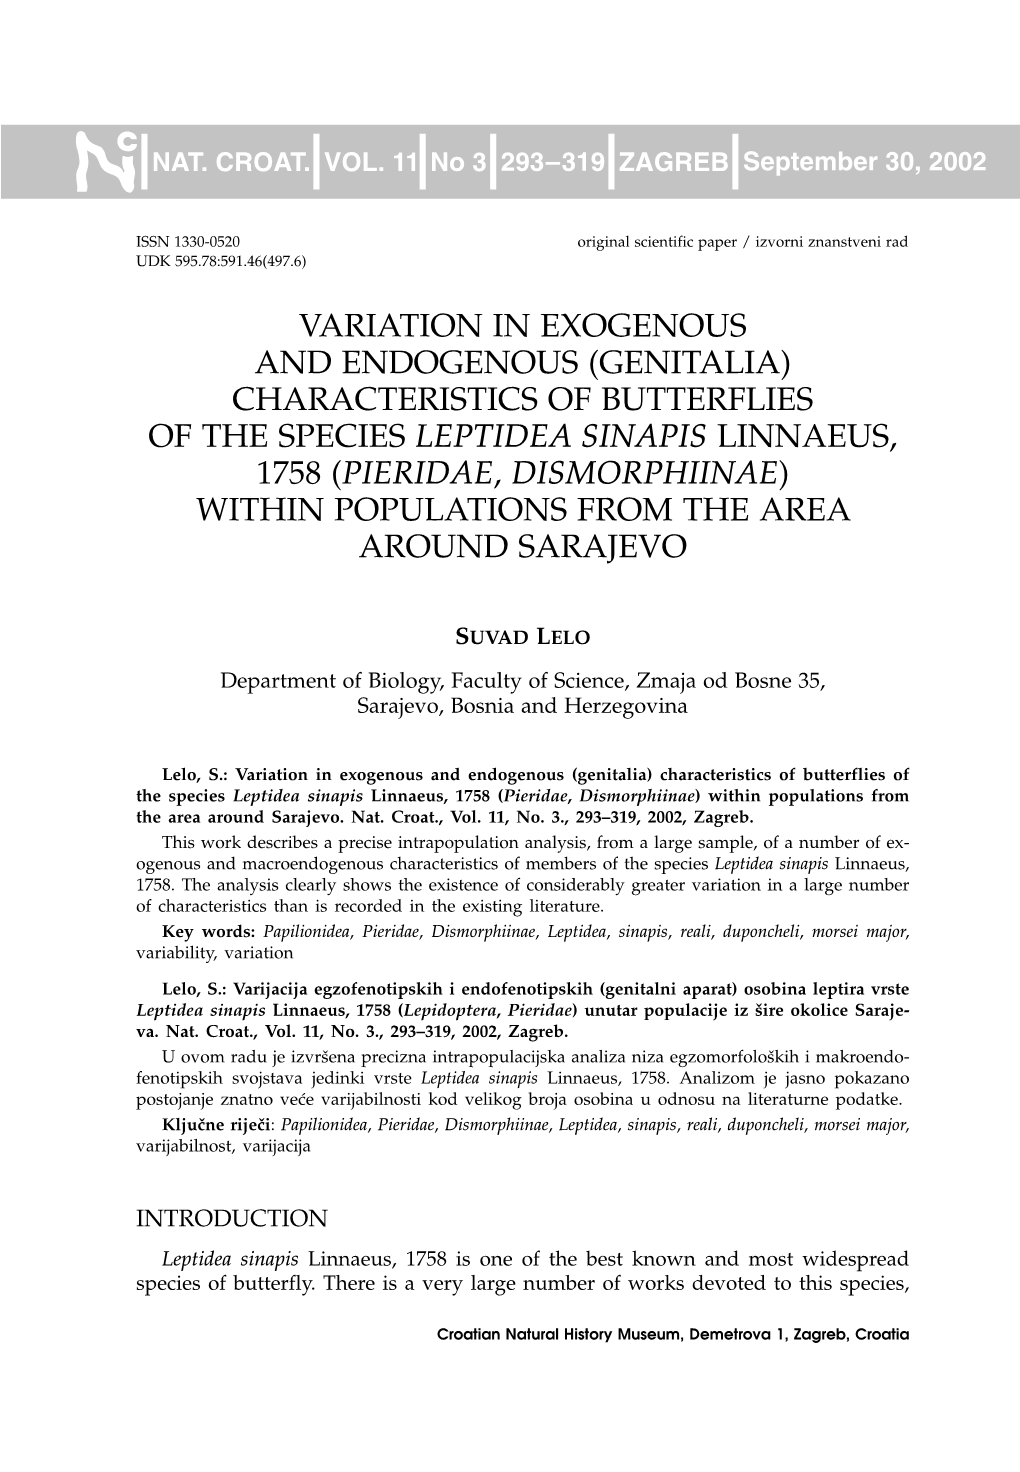 Variation in Exogenous and Endogenous (Genitalia) Characteristics of Butterflies of the Species Leptidea Sinapis Linnaeus, 1758